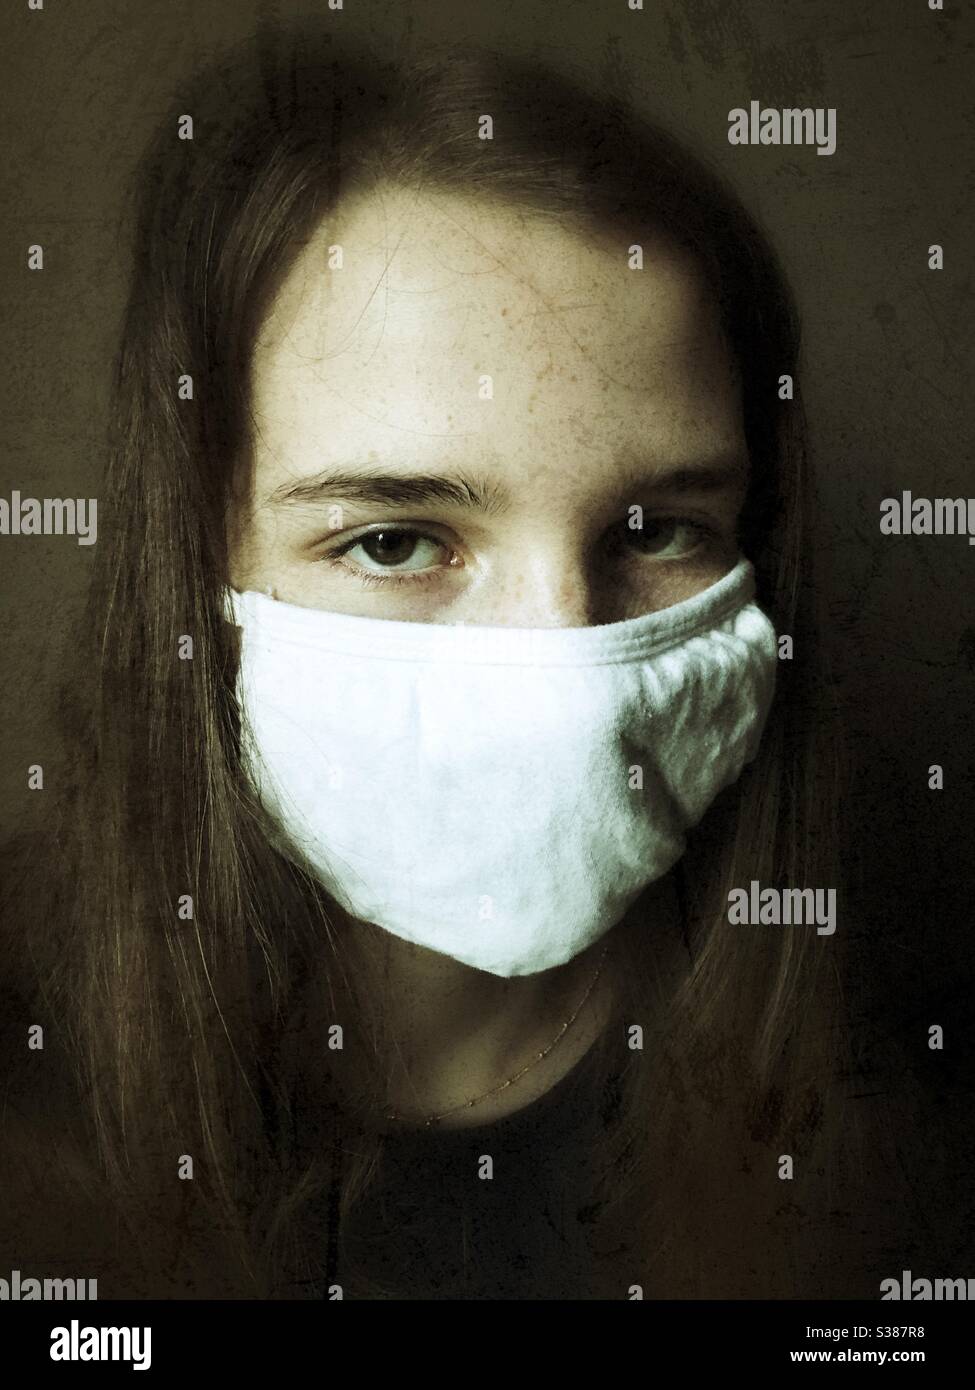 Portrait of teen girl wearing white cotton face mask during Covid-19 pandemic. Stock Photo